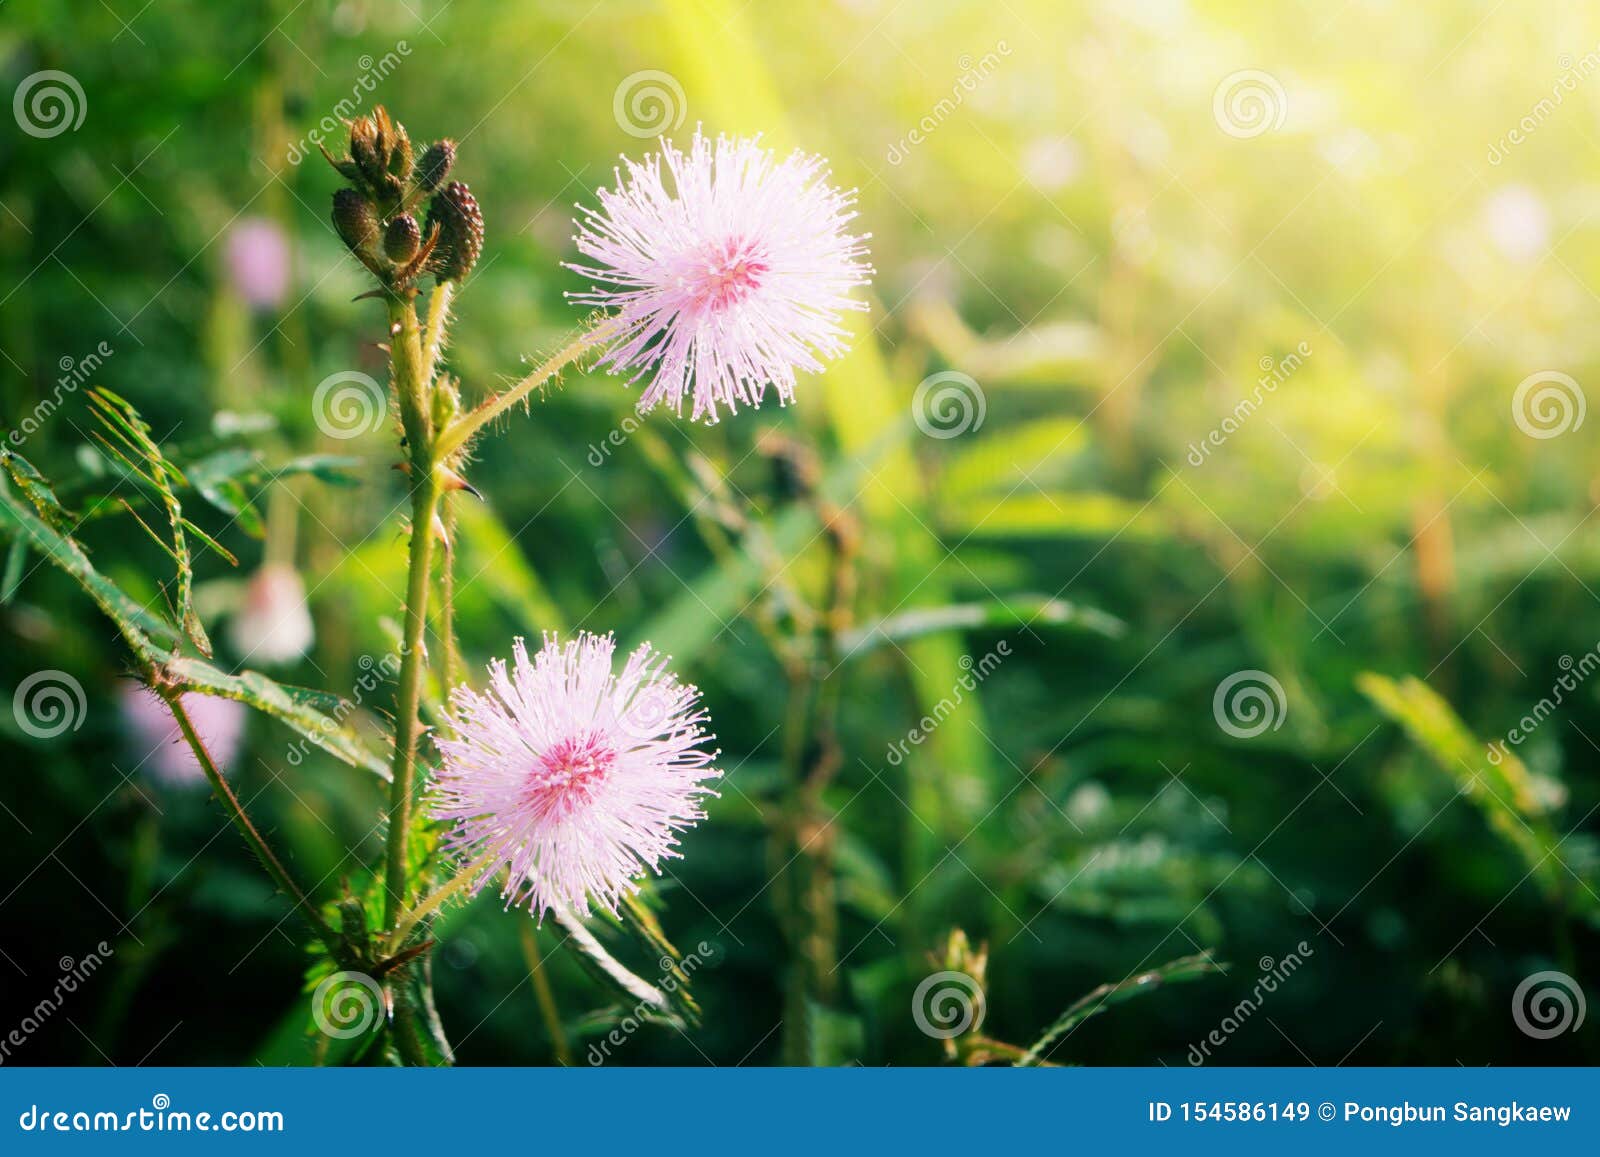 Touch Me Not Flower Blooming at Sunrise Stock Image - Image of mimosa,  environment: 154586149